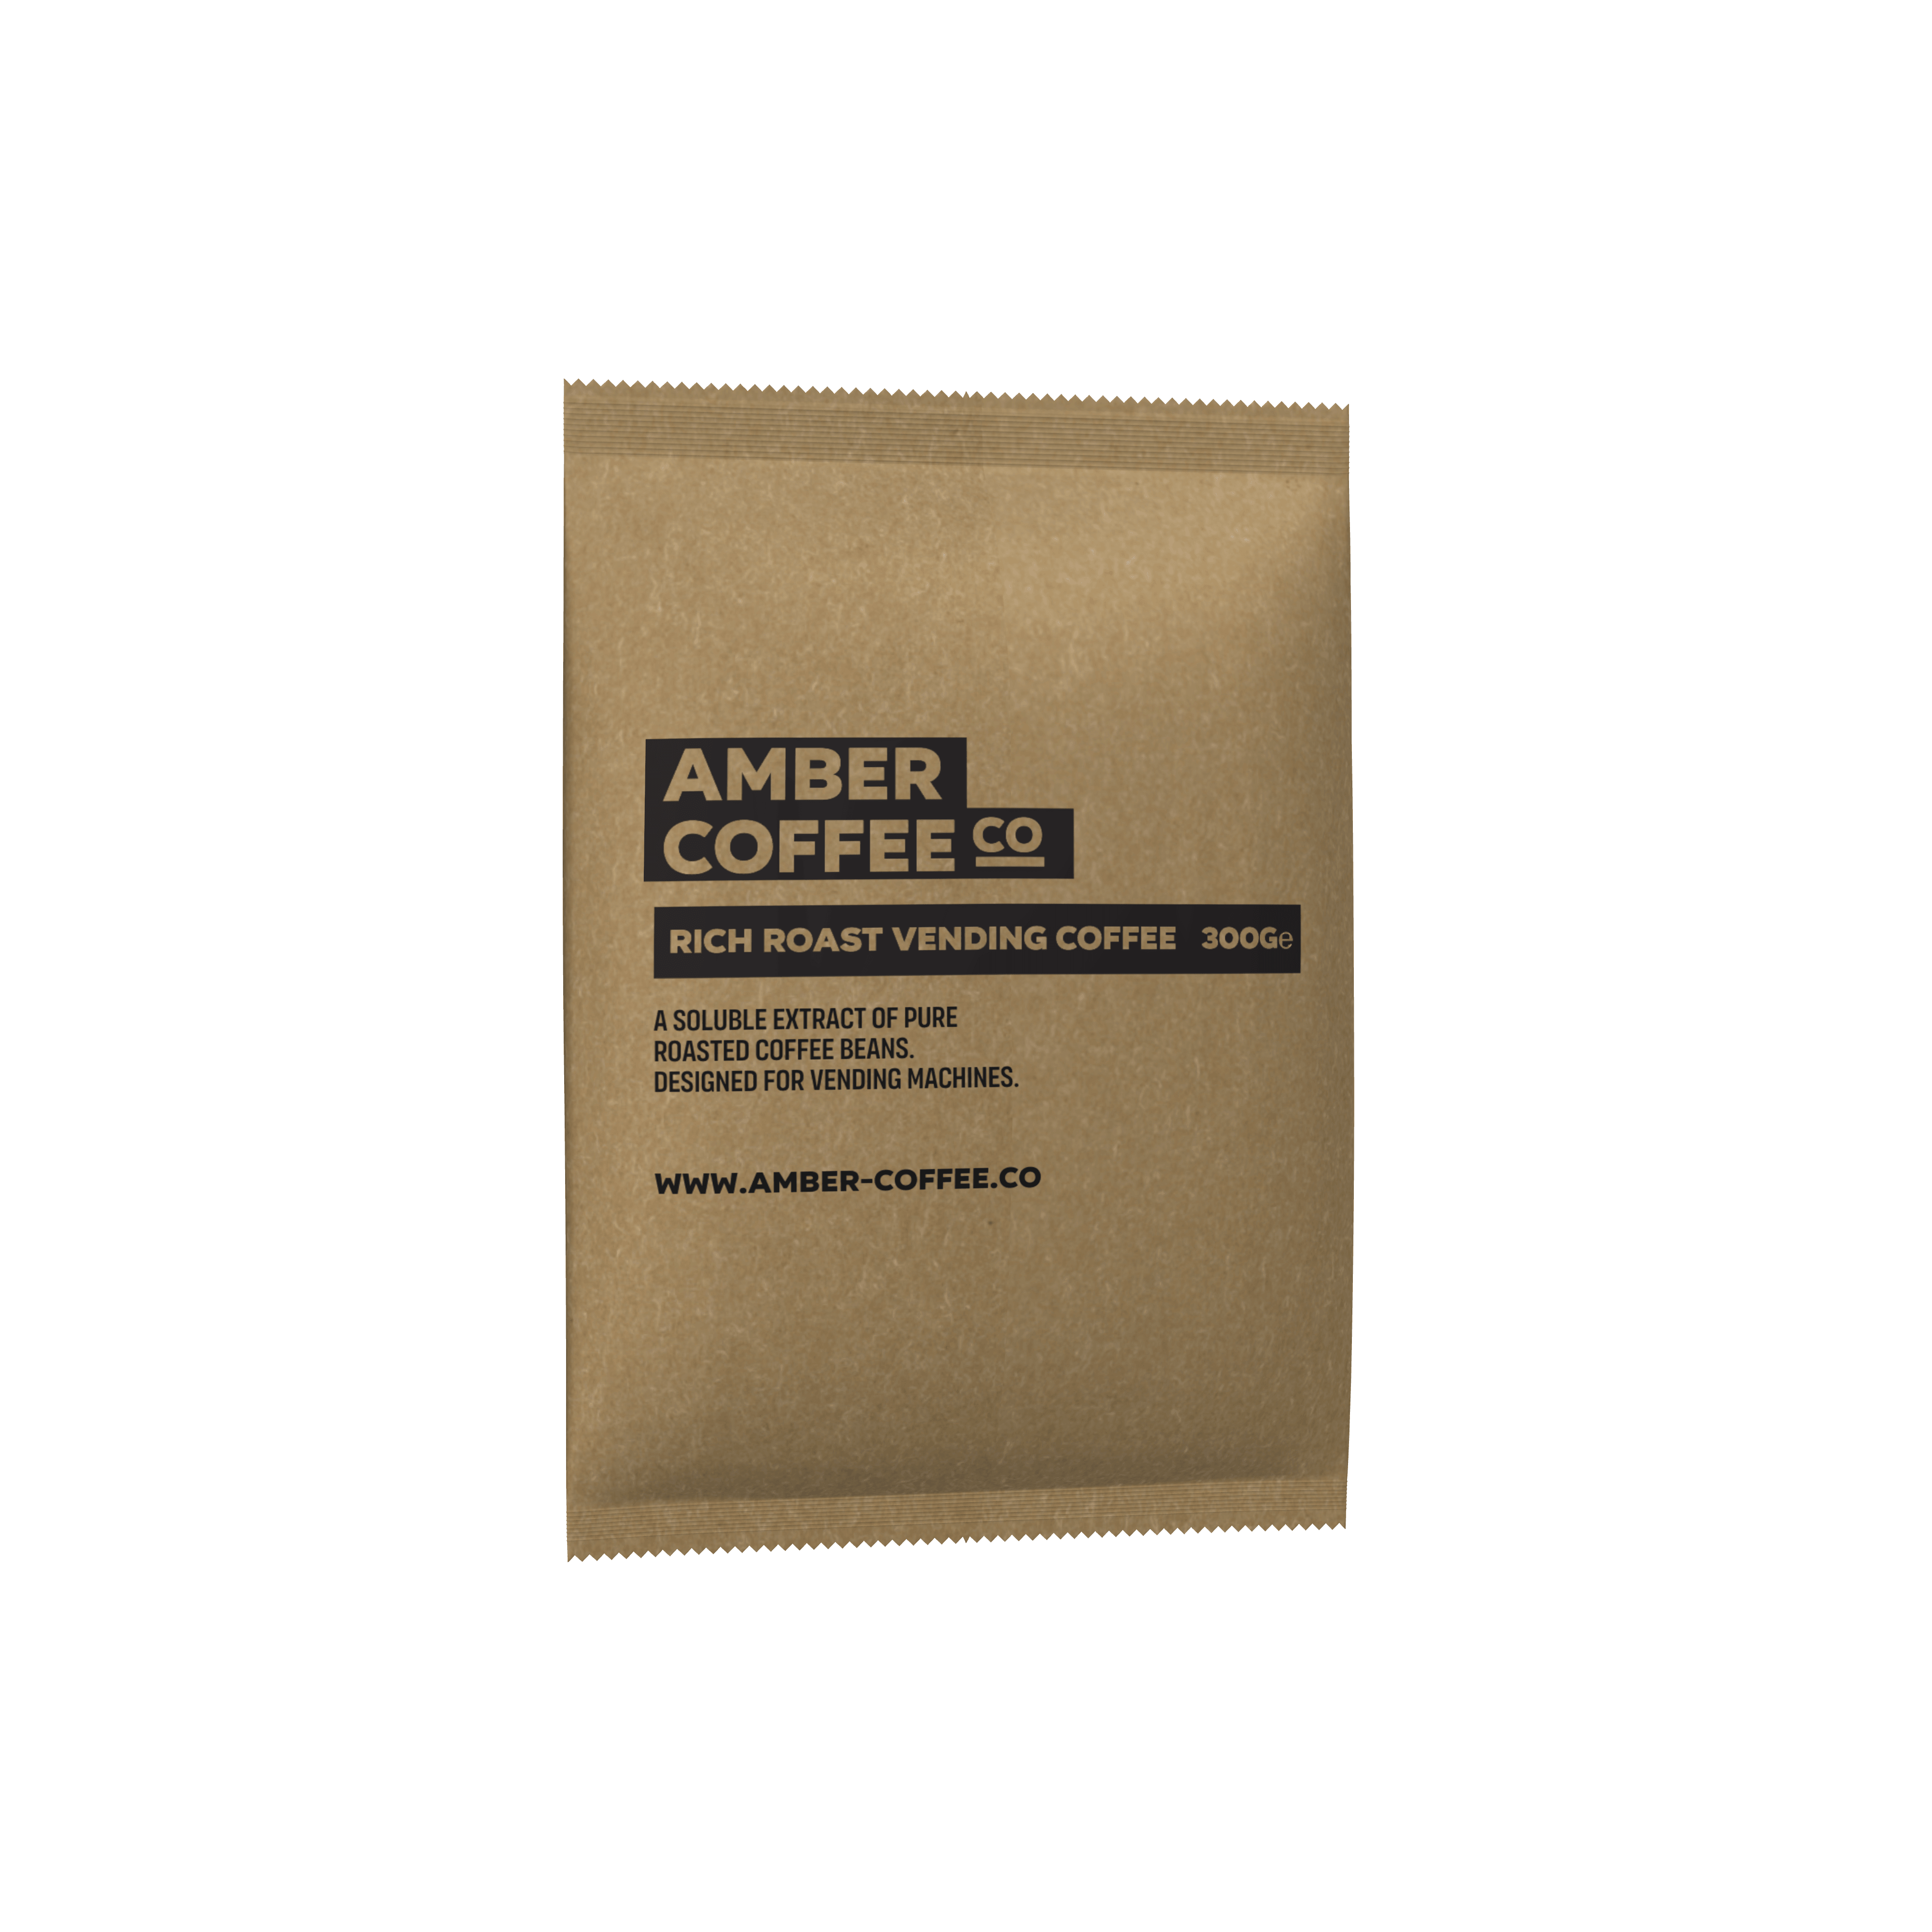 Amber Coffee Co - Rich Roast Instant Vending Coffee - 10 x 300g Bags - Vending Superstore